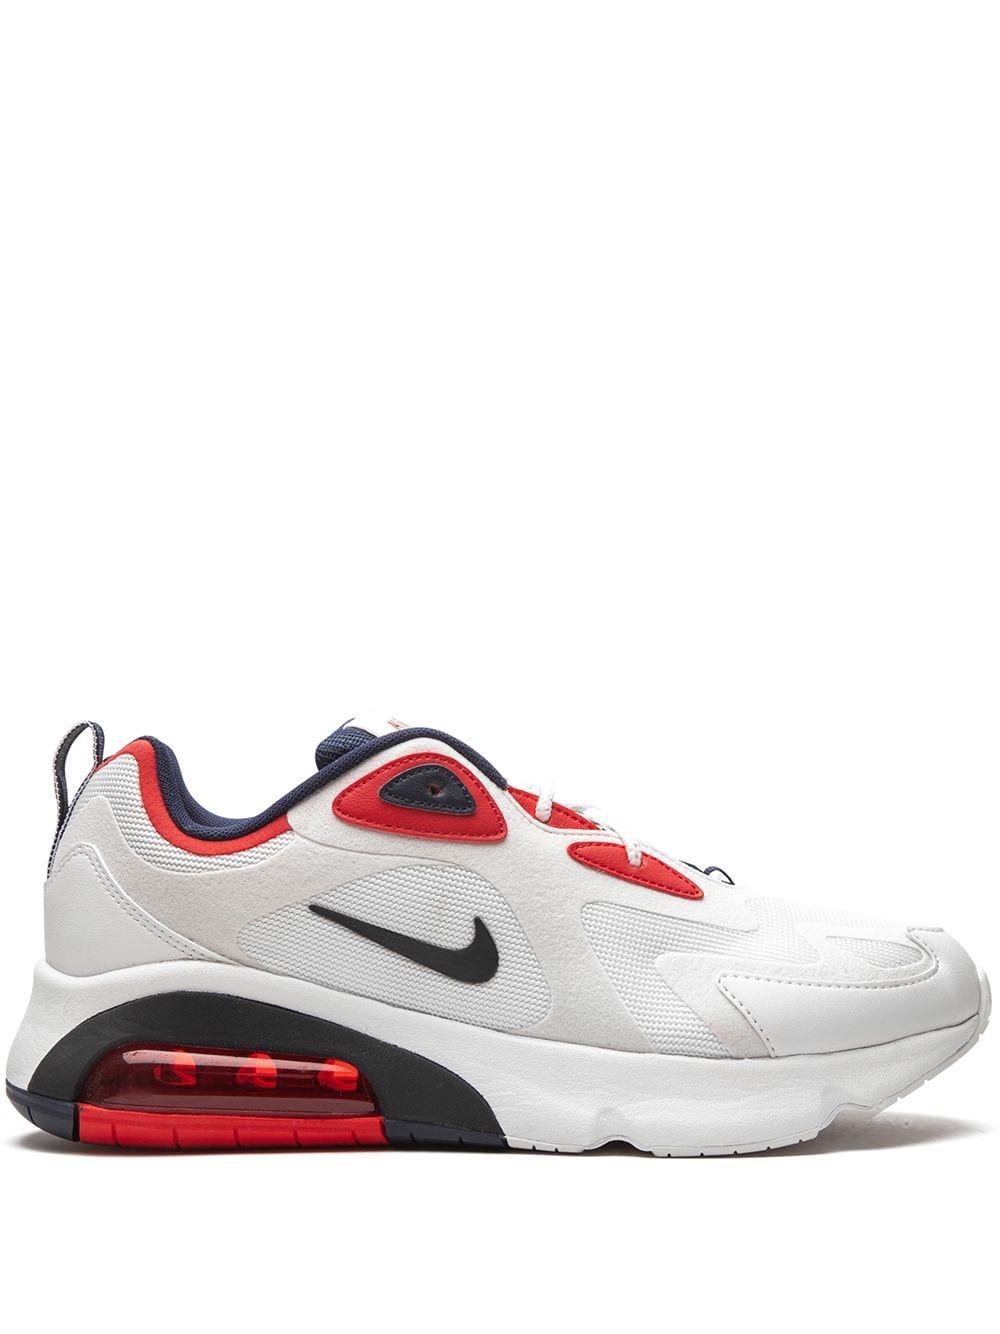 Problemer Tolk Tante Nike Air Max 200 sneakers price in Doha Qatar | Compare Prices